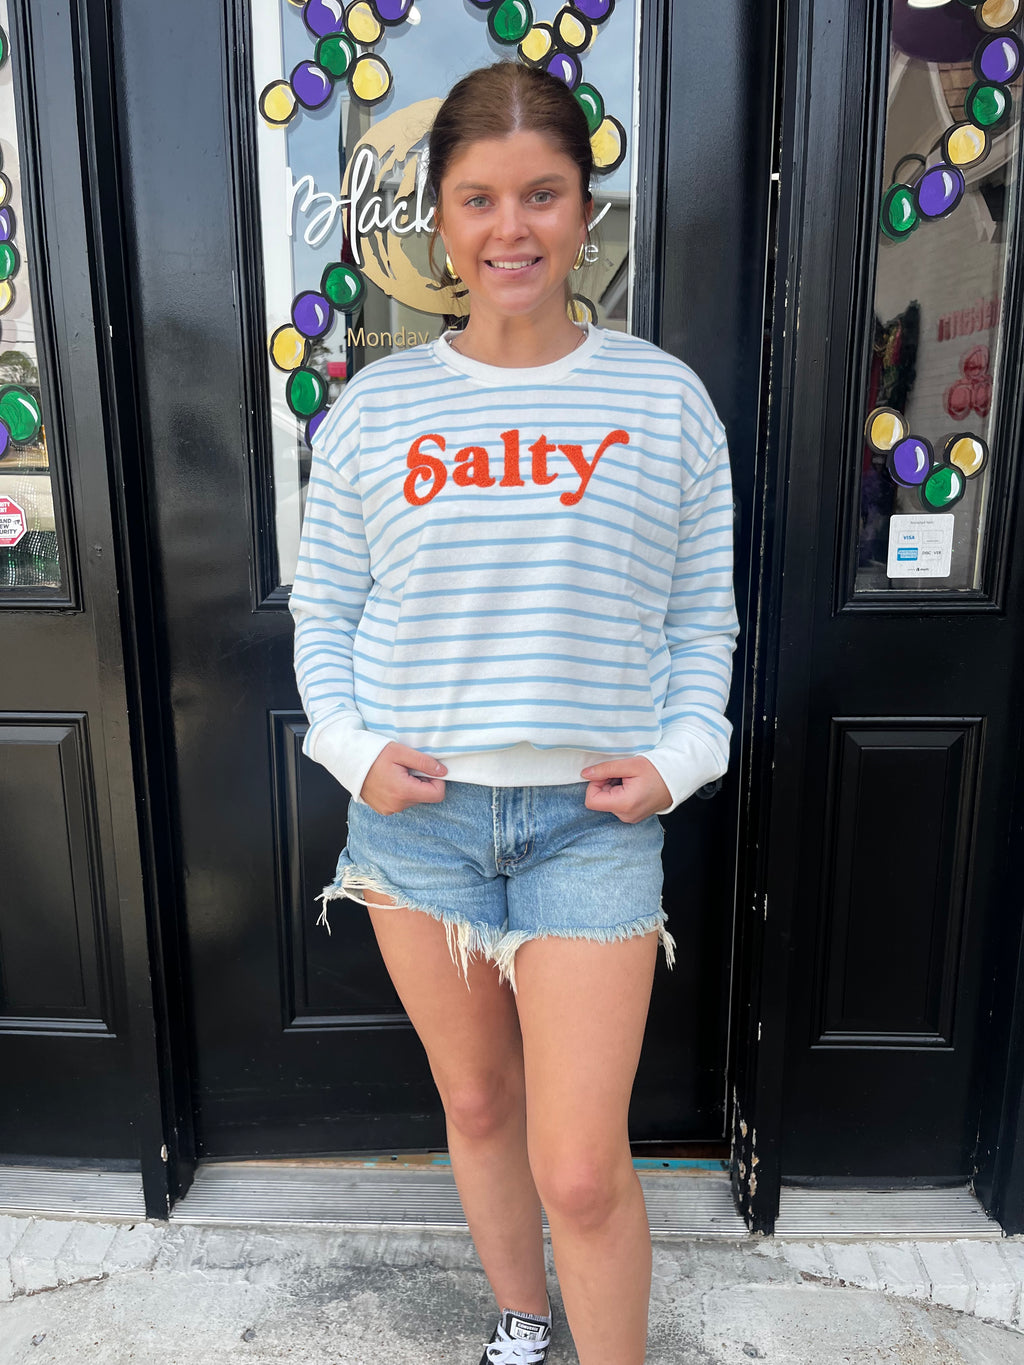 Salty Pullover